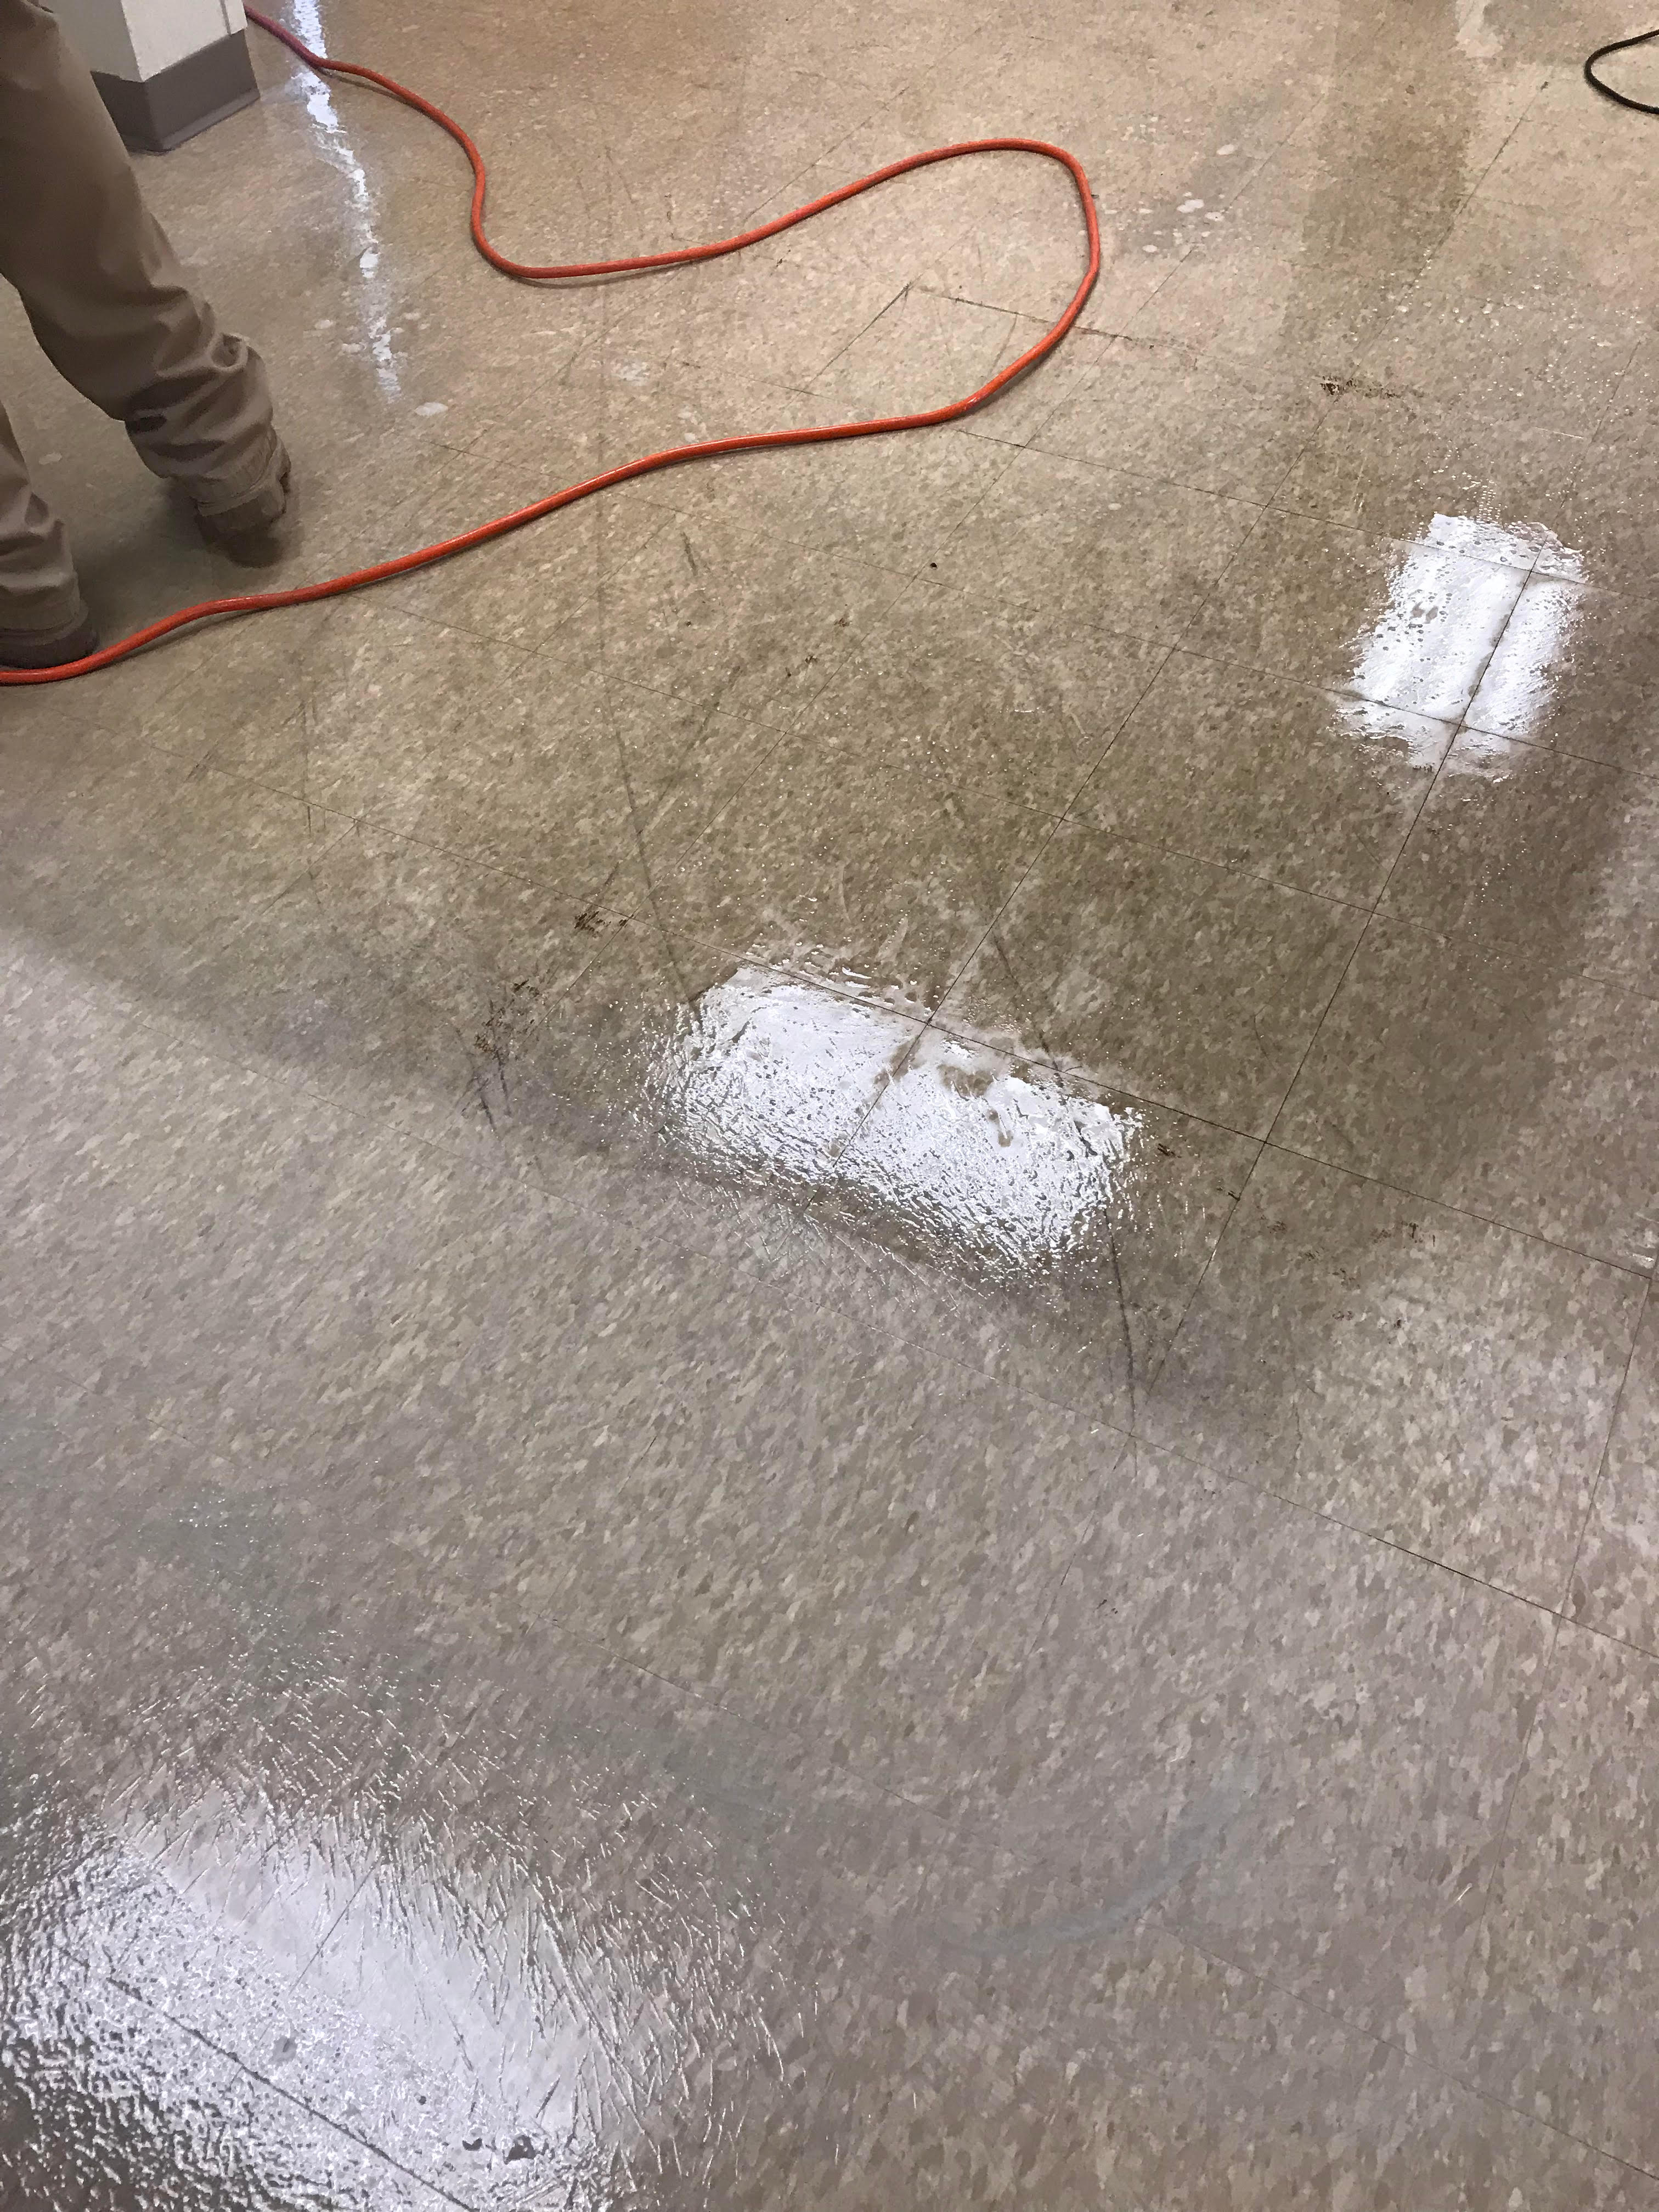 Stripping and waxing floors